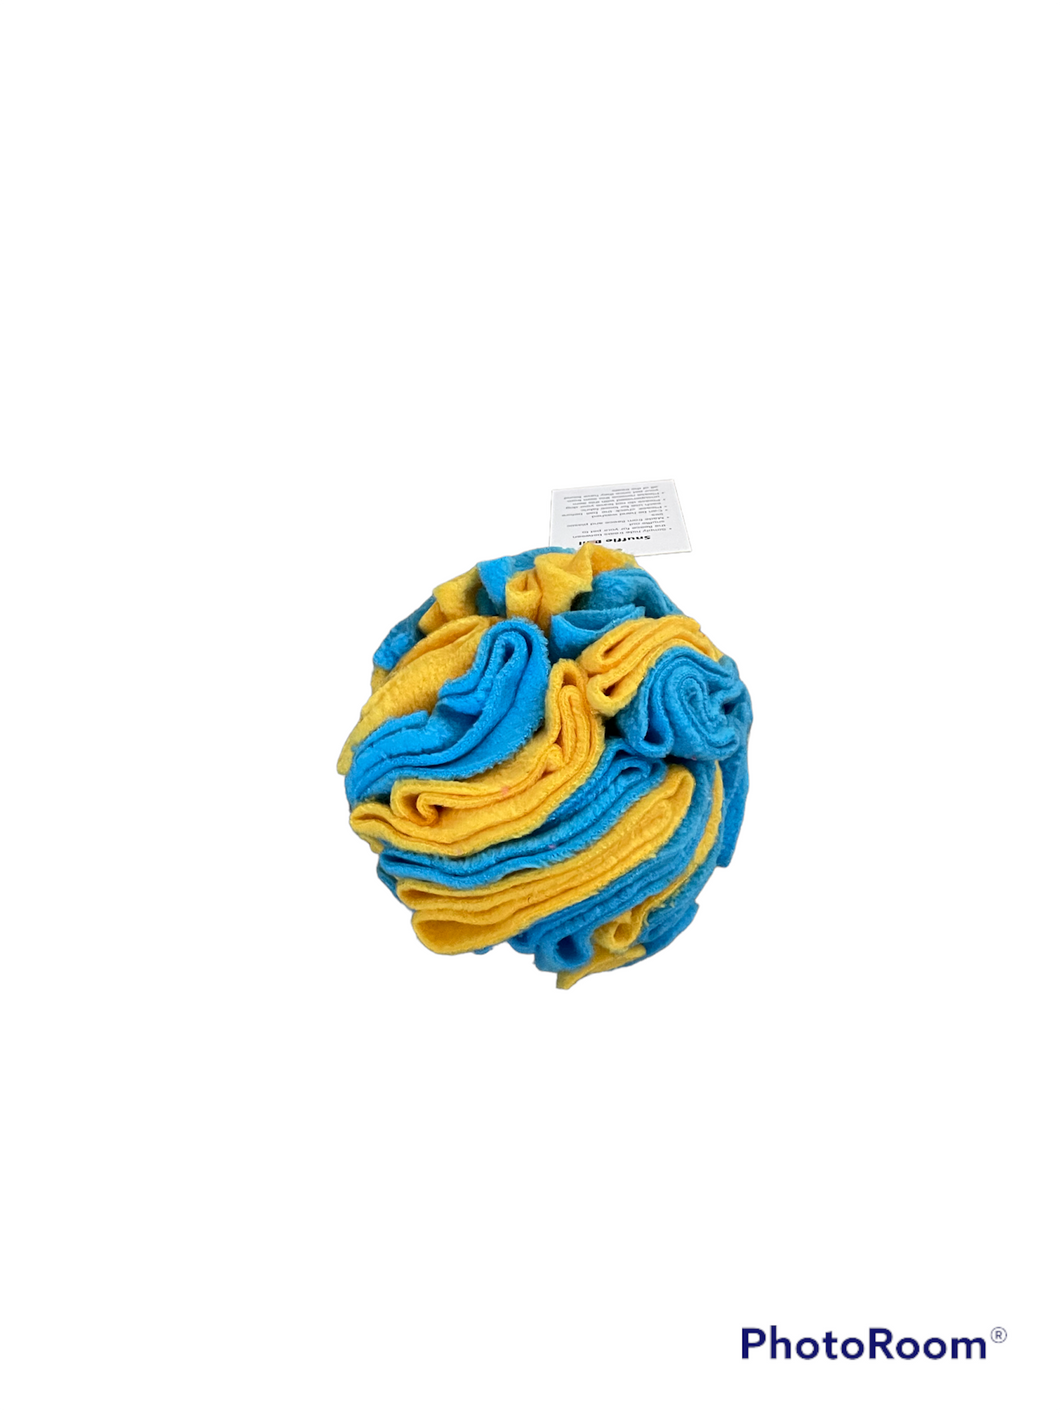 Snuffle ball blue and yellow, 6 inch size